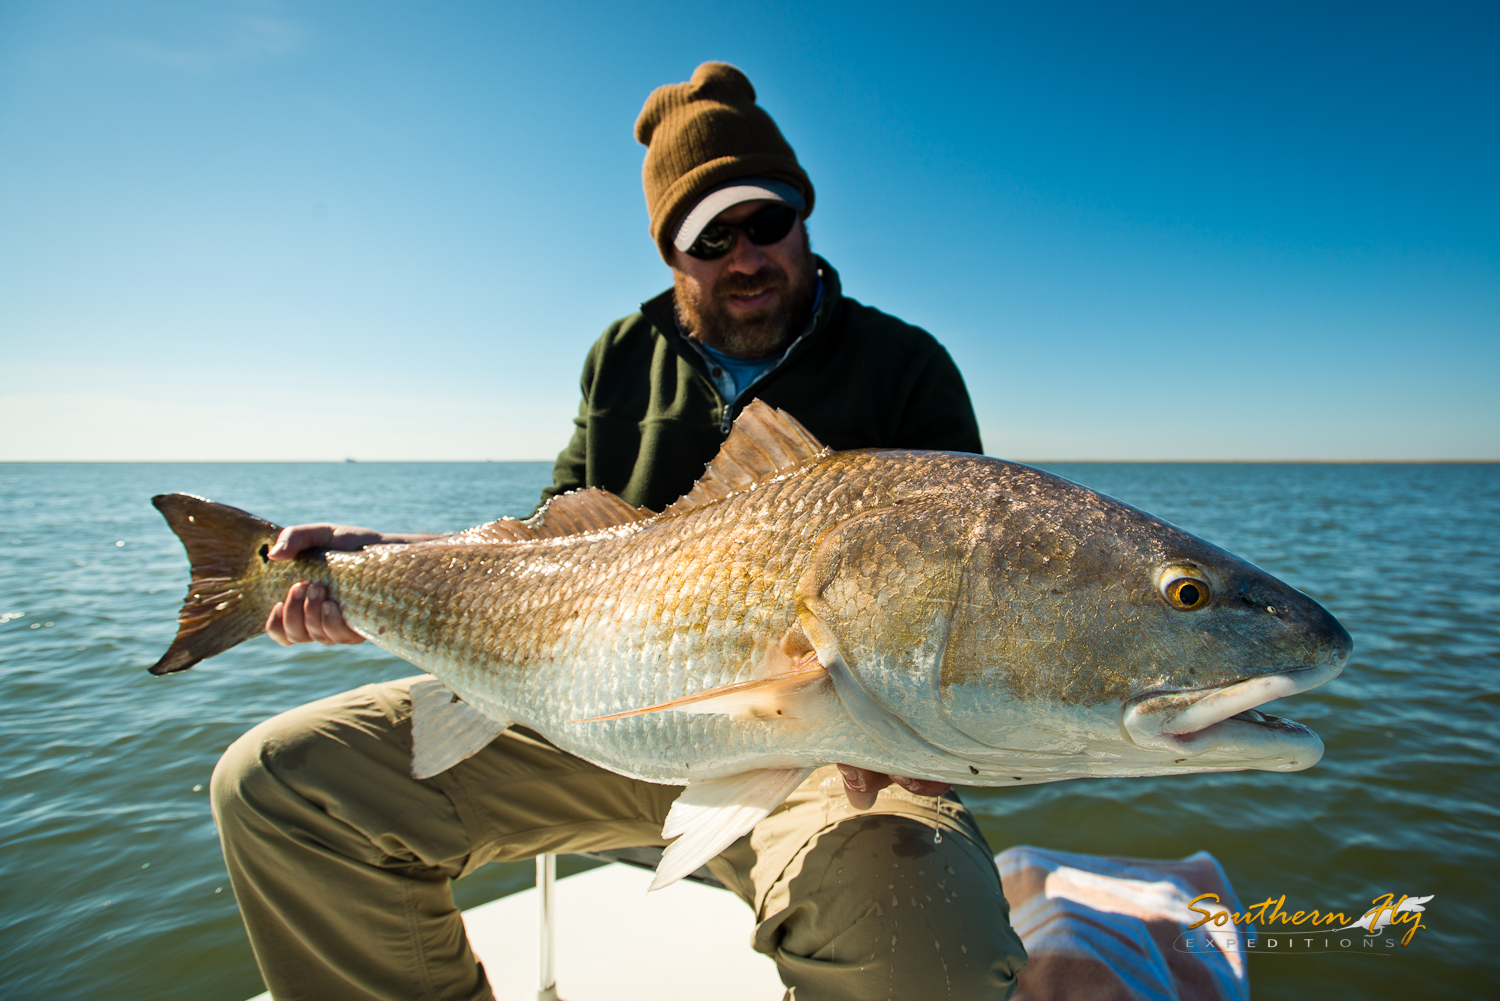 fly fishing new orleans louisiana Southern Fly Expeditions